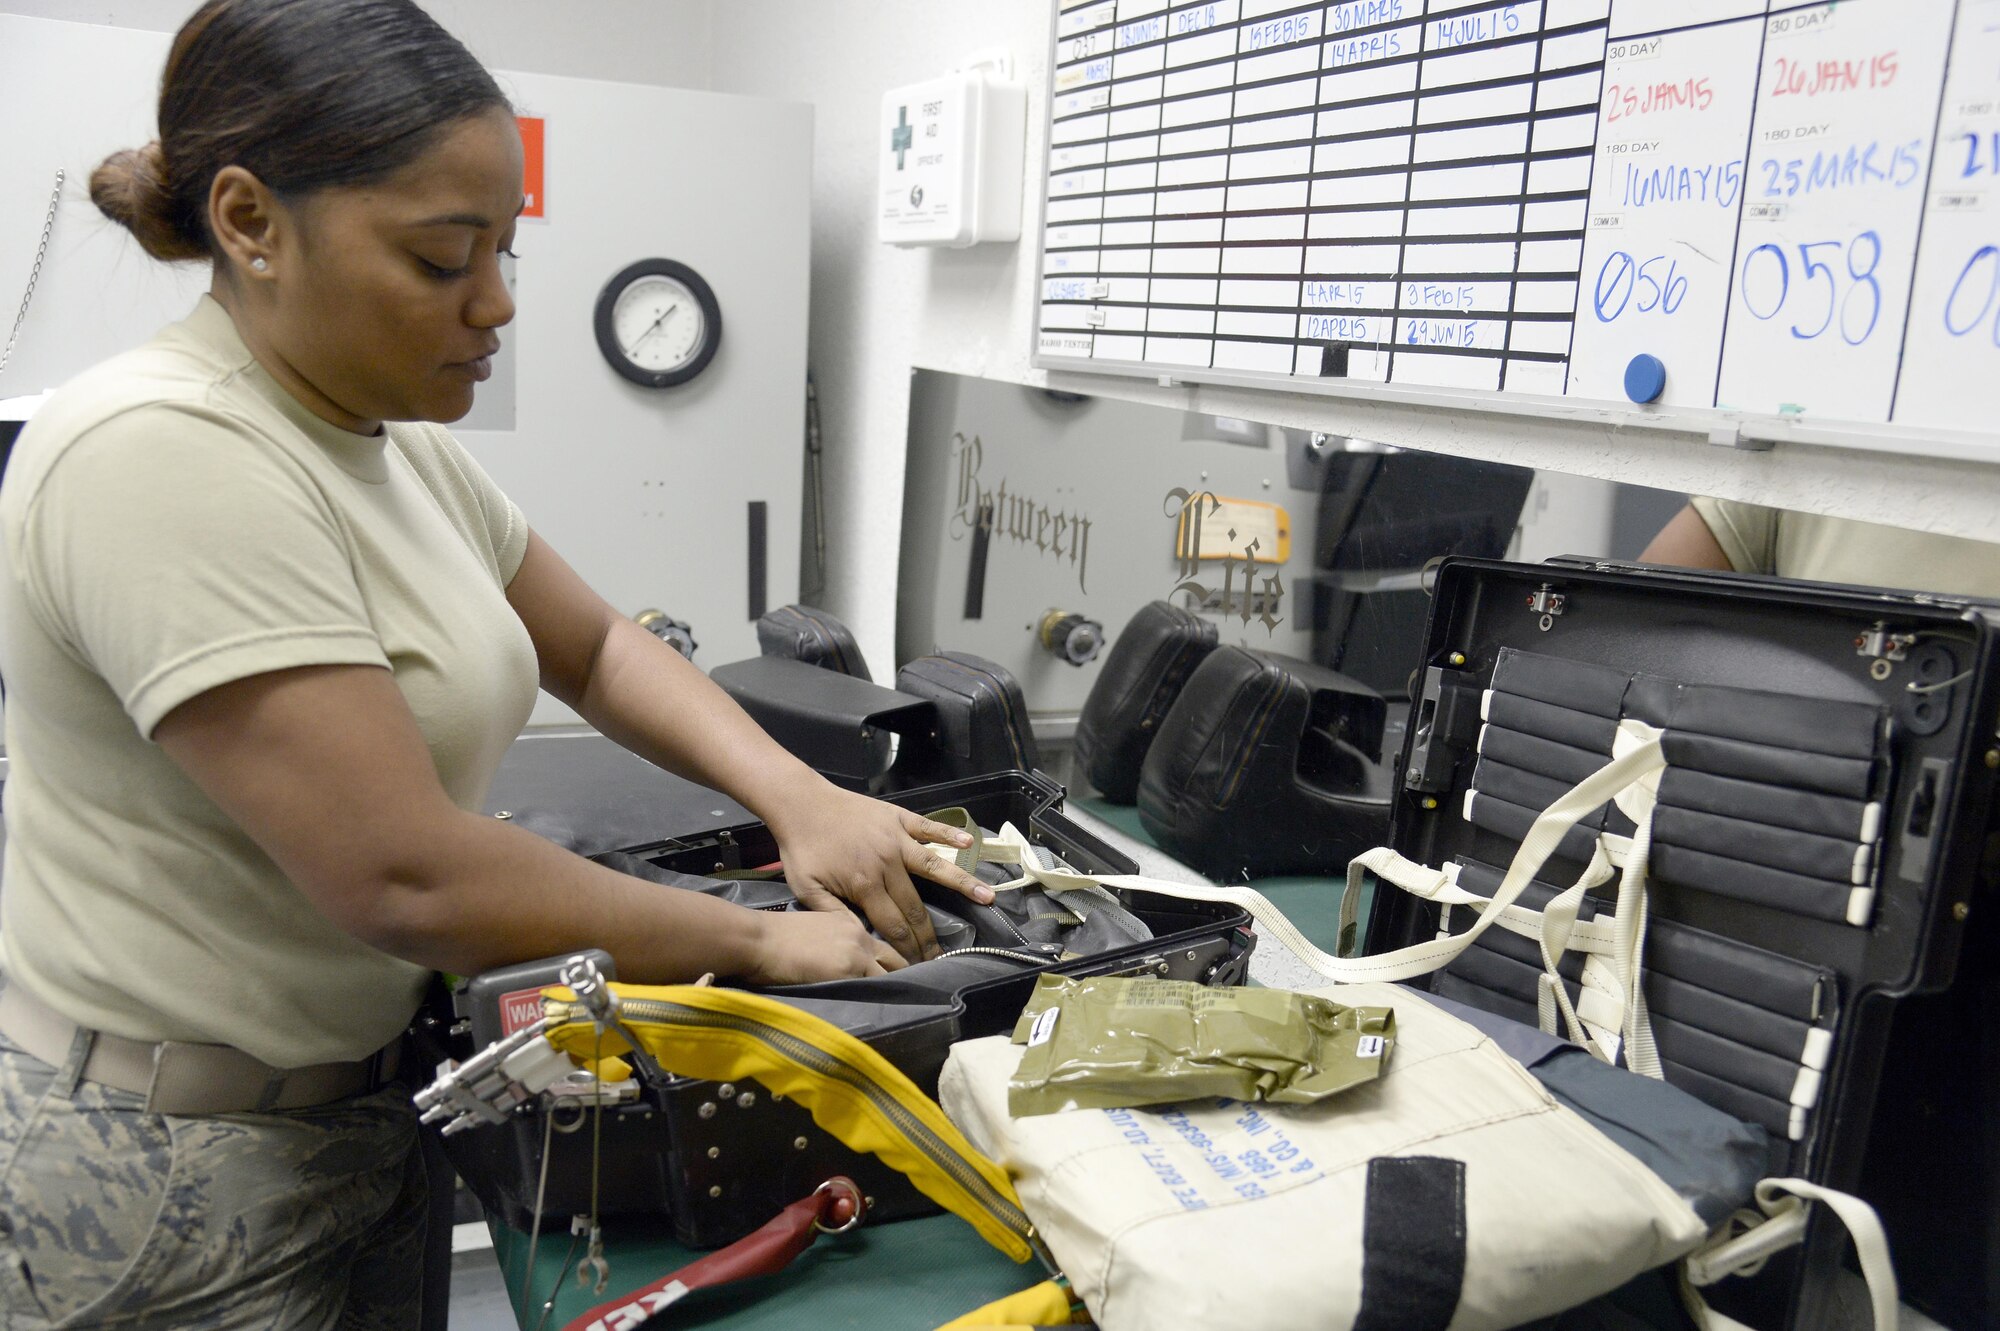 Senior Airman Tamika, launch and recovery technician, inspects the components of a pilot’s seat as part of a 30-day inspection at an undisclosed location in Southwest Asia Jan. 20, 2015. Along with maintaining and inspecting the suit, the physiological support detachment Airmen also maintain and inspect the pilot’s survival kit and its components. Tamika is currently deployed from Beale Air Force Base, Calif. (U.S. Air Force photo/Tech. Sgt. Marie Brown)